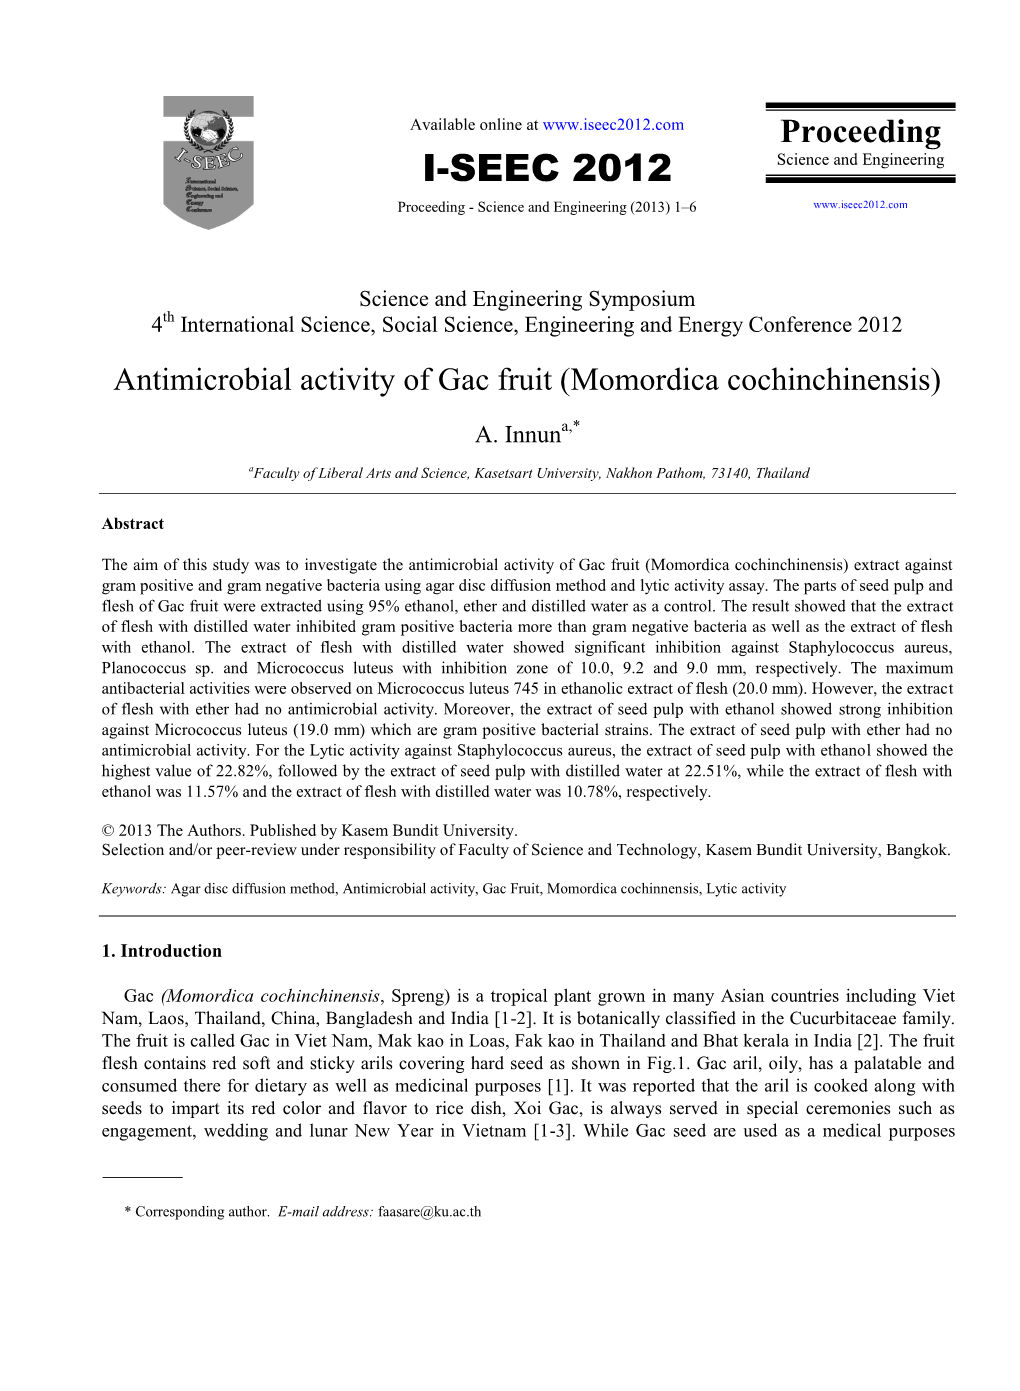 Antimicrobial Activity of Gac Fruit (Momordica Cochinchinensis)